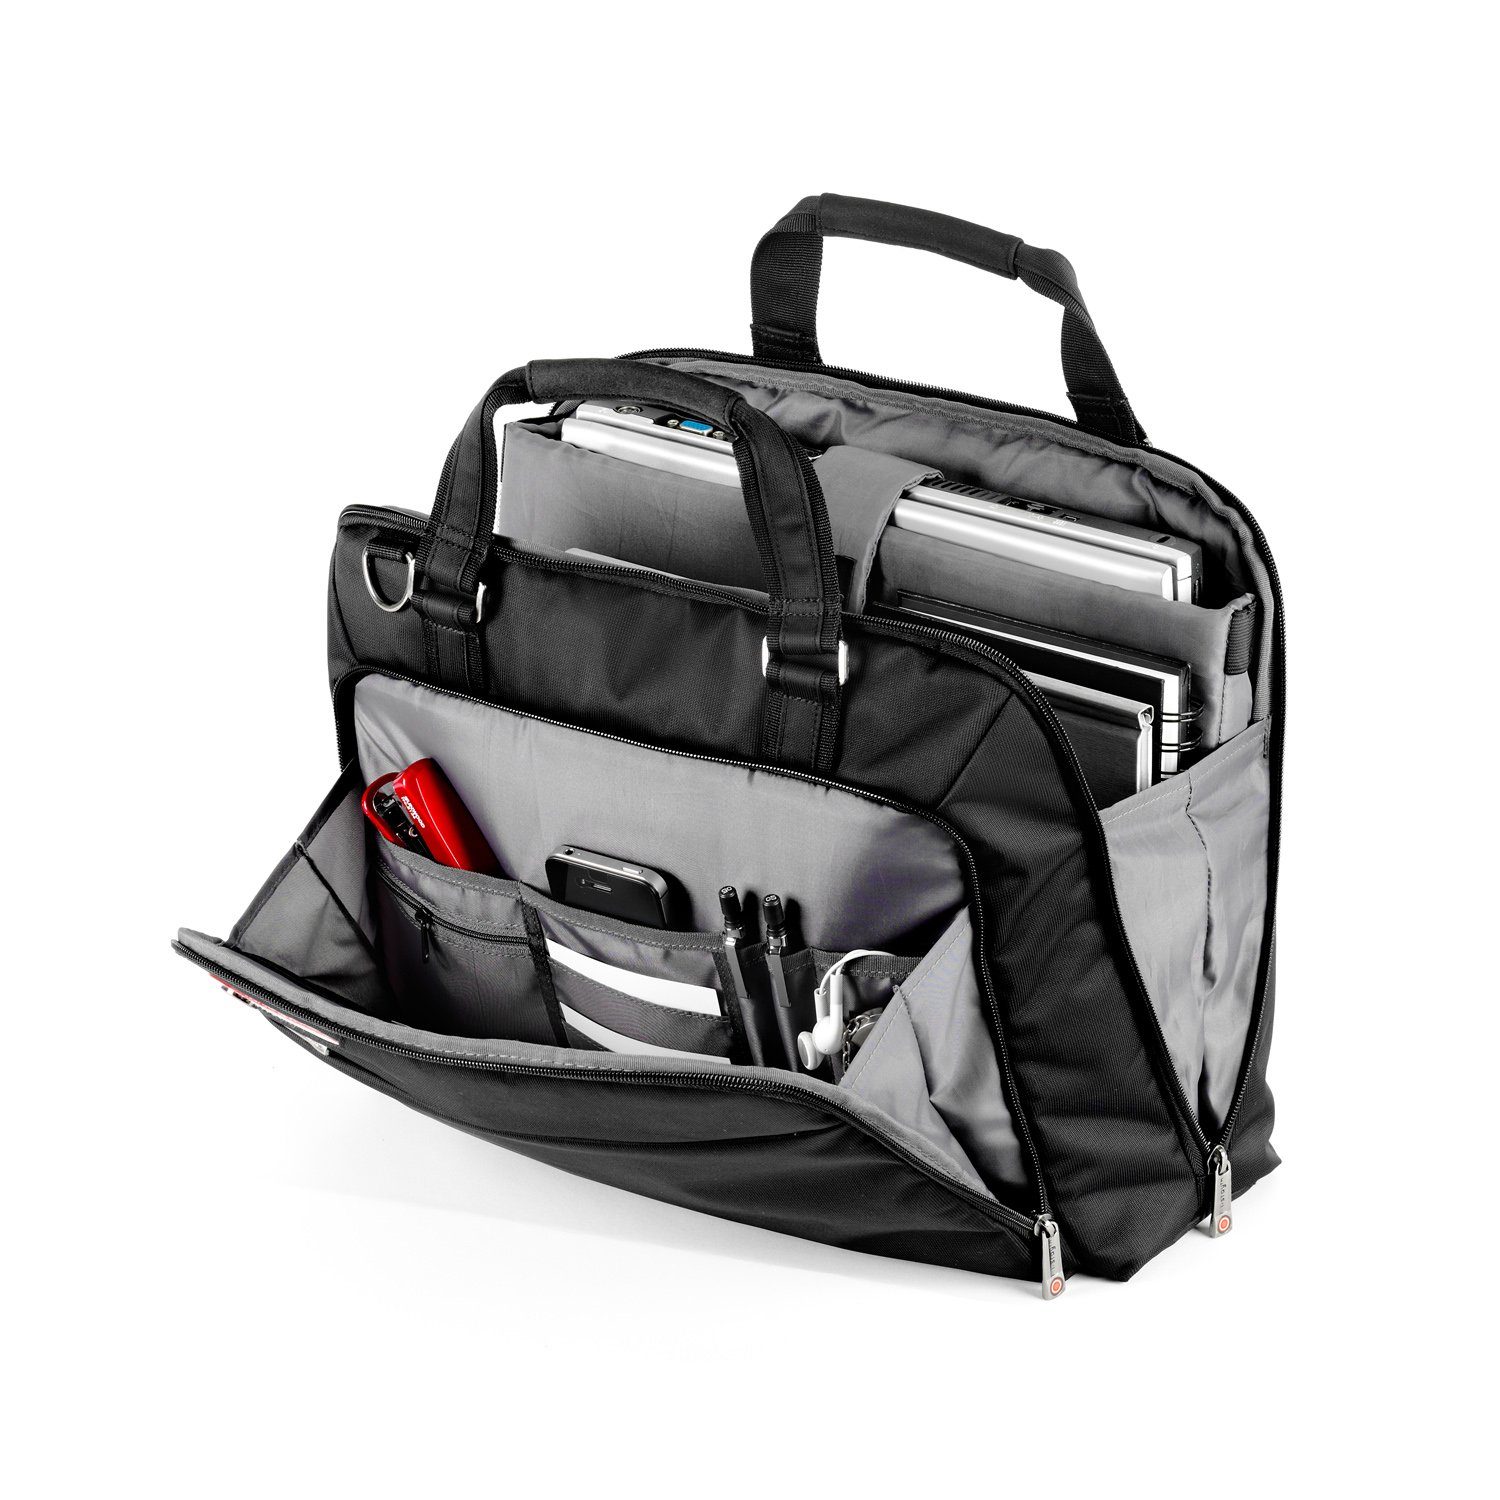 is0106 Laptoptasche 15,6 Zoll I-STAY